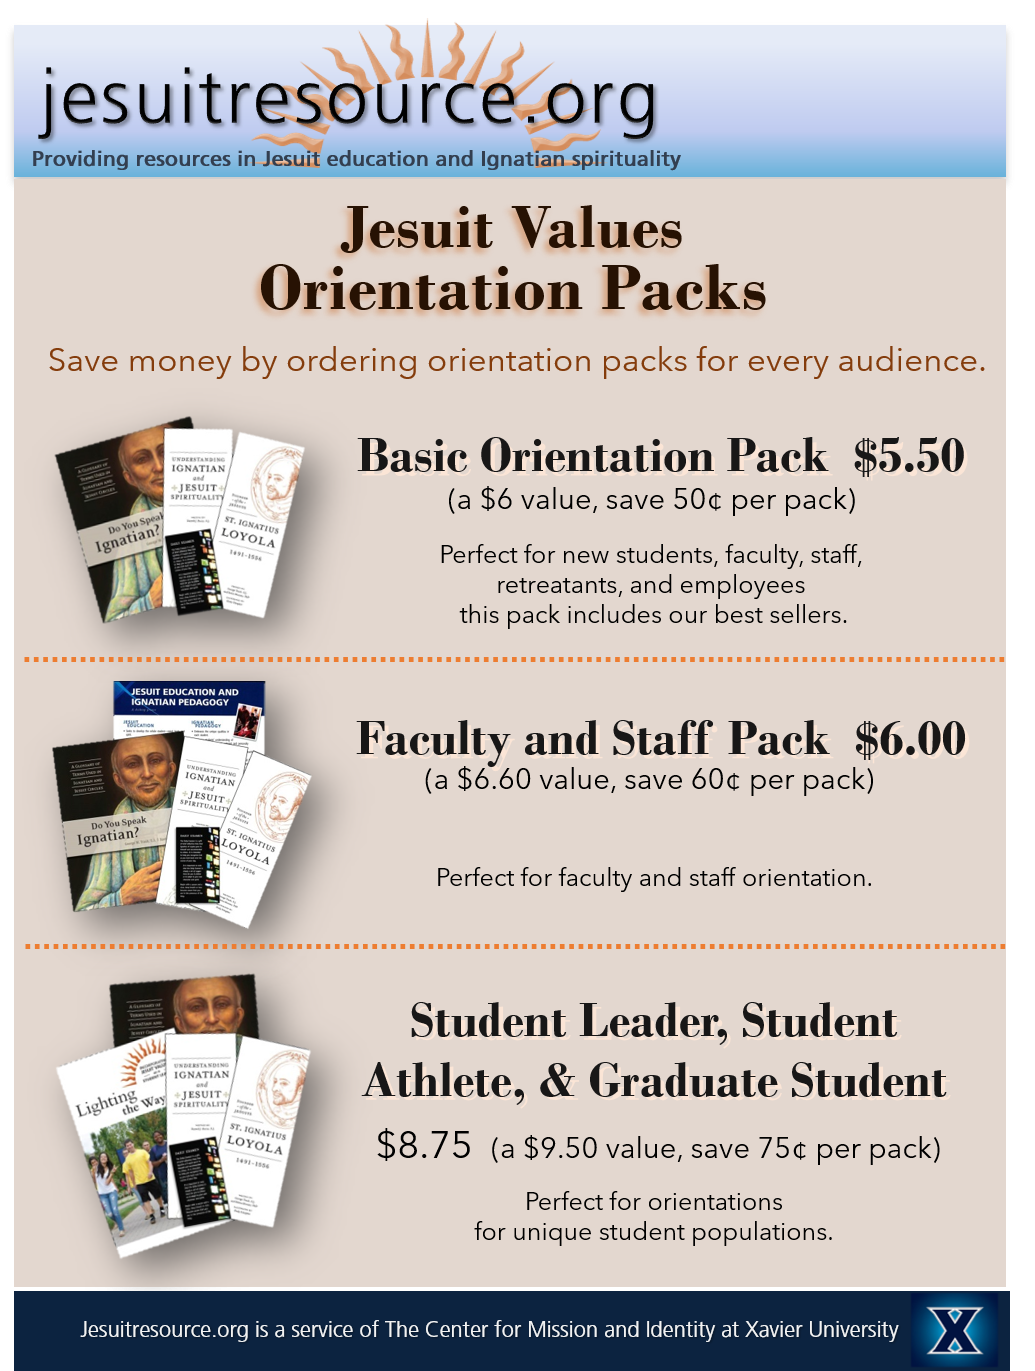 ad-for-orientation-packs.png